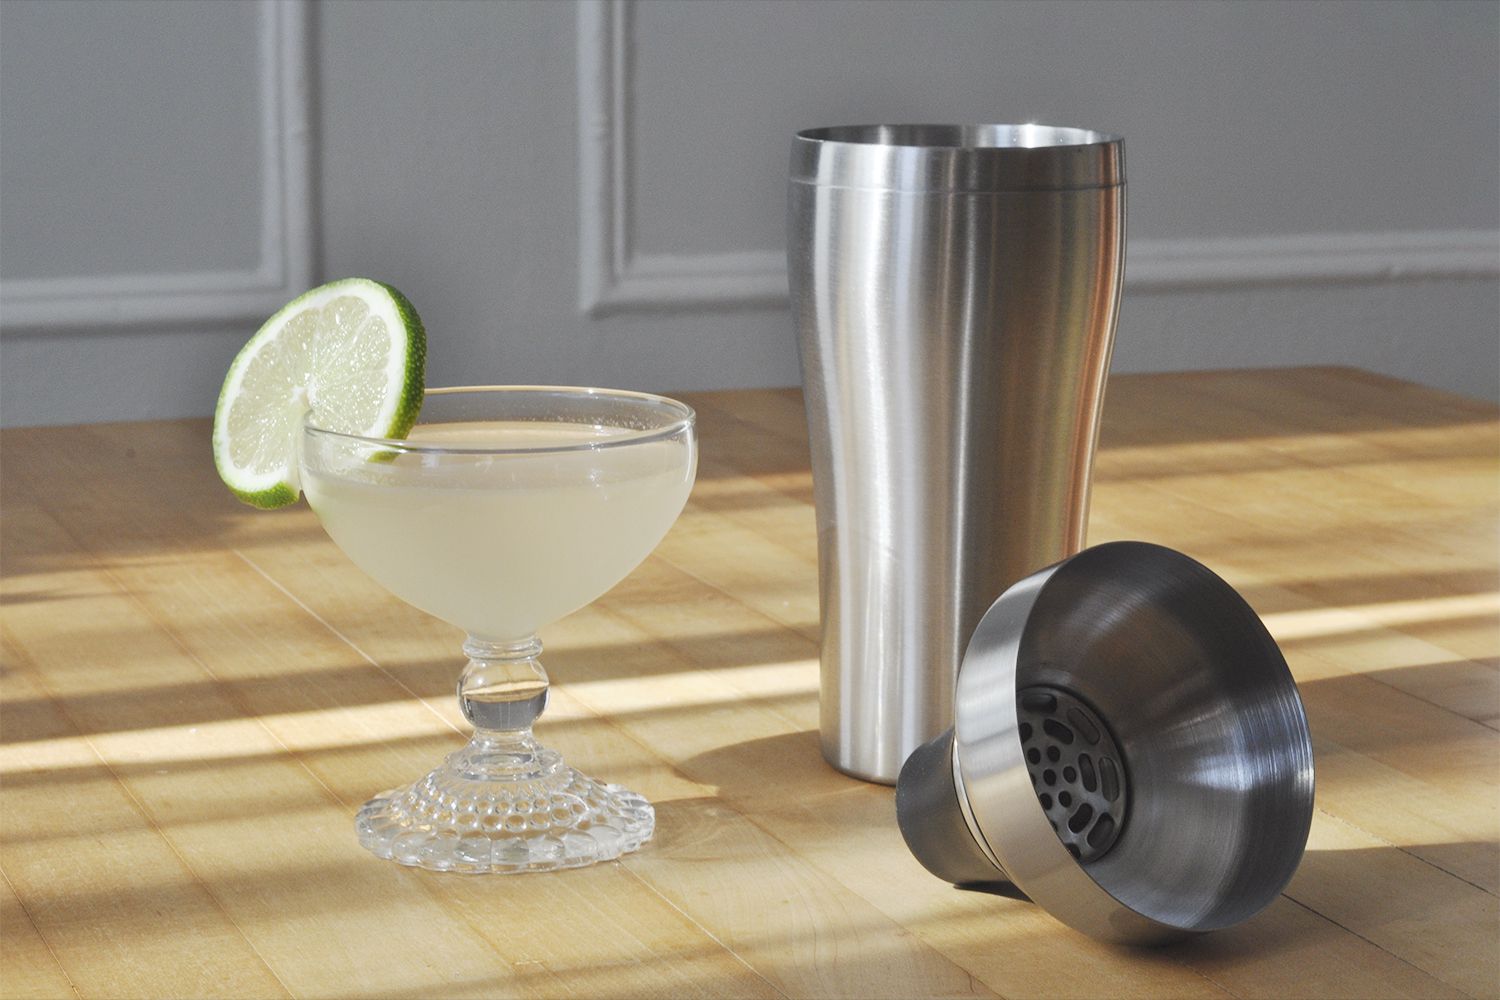 Martini Shaker Review: The Perfect Cocktail Mixing Tool